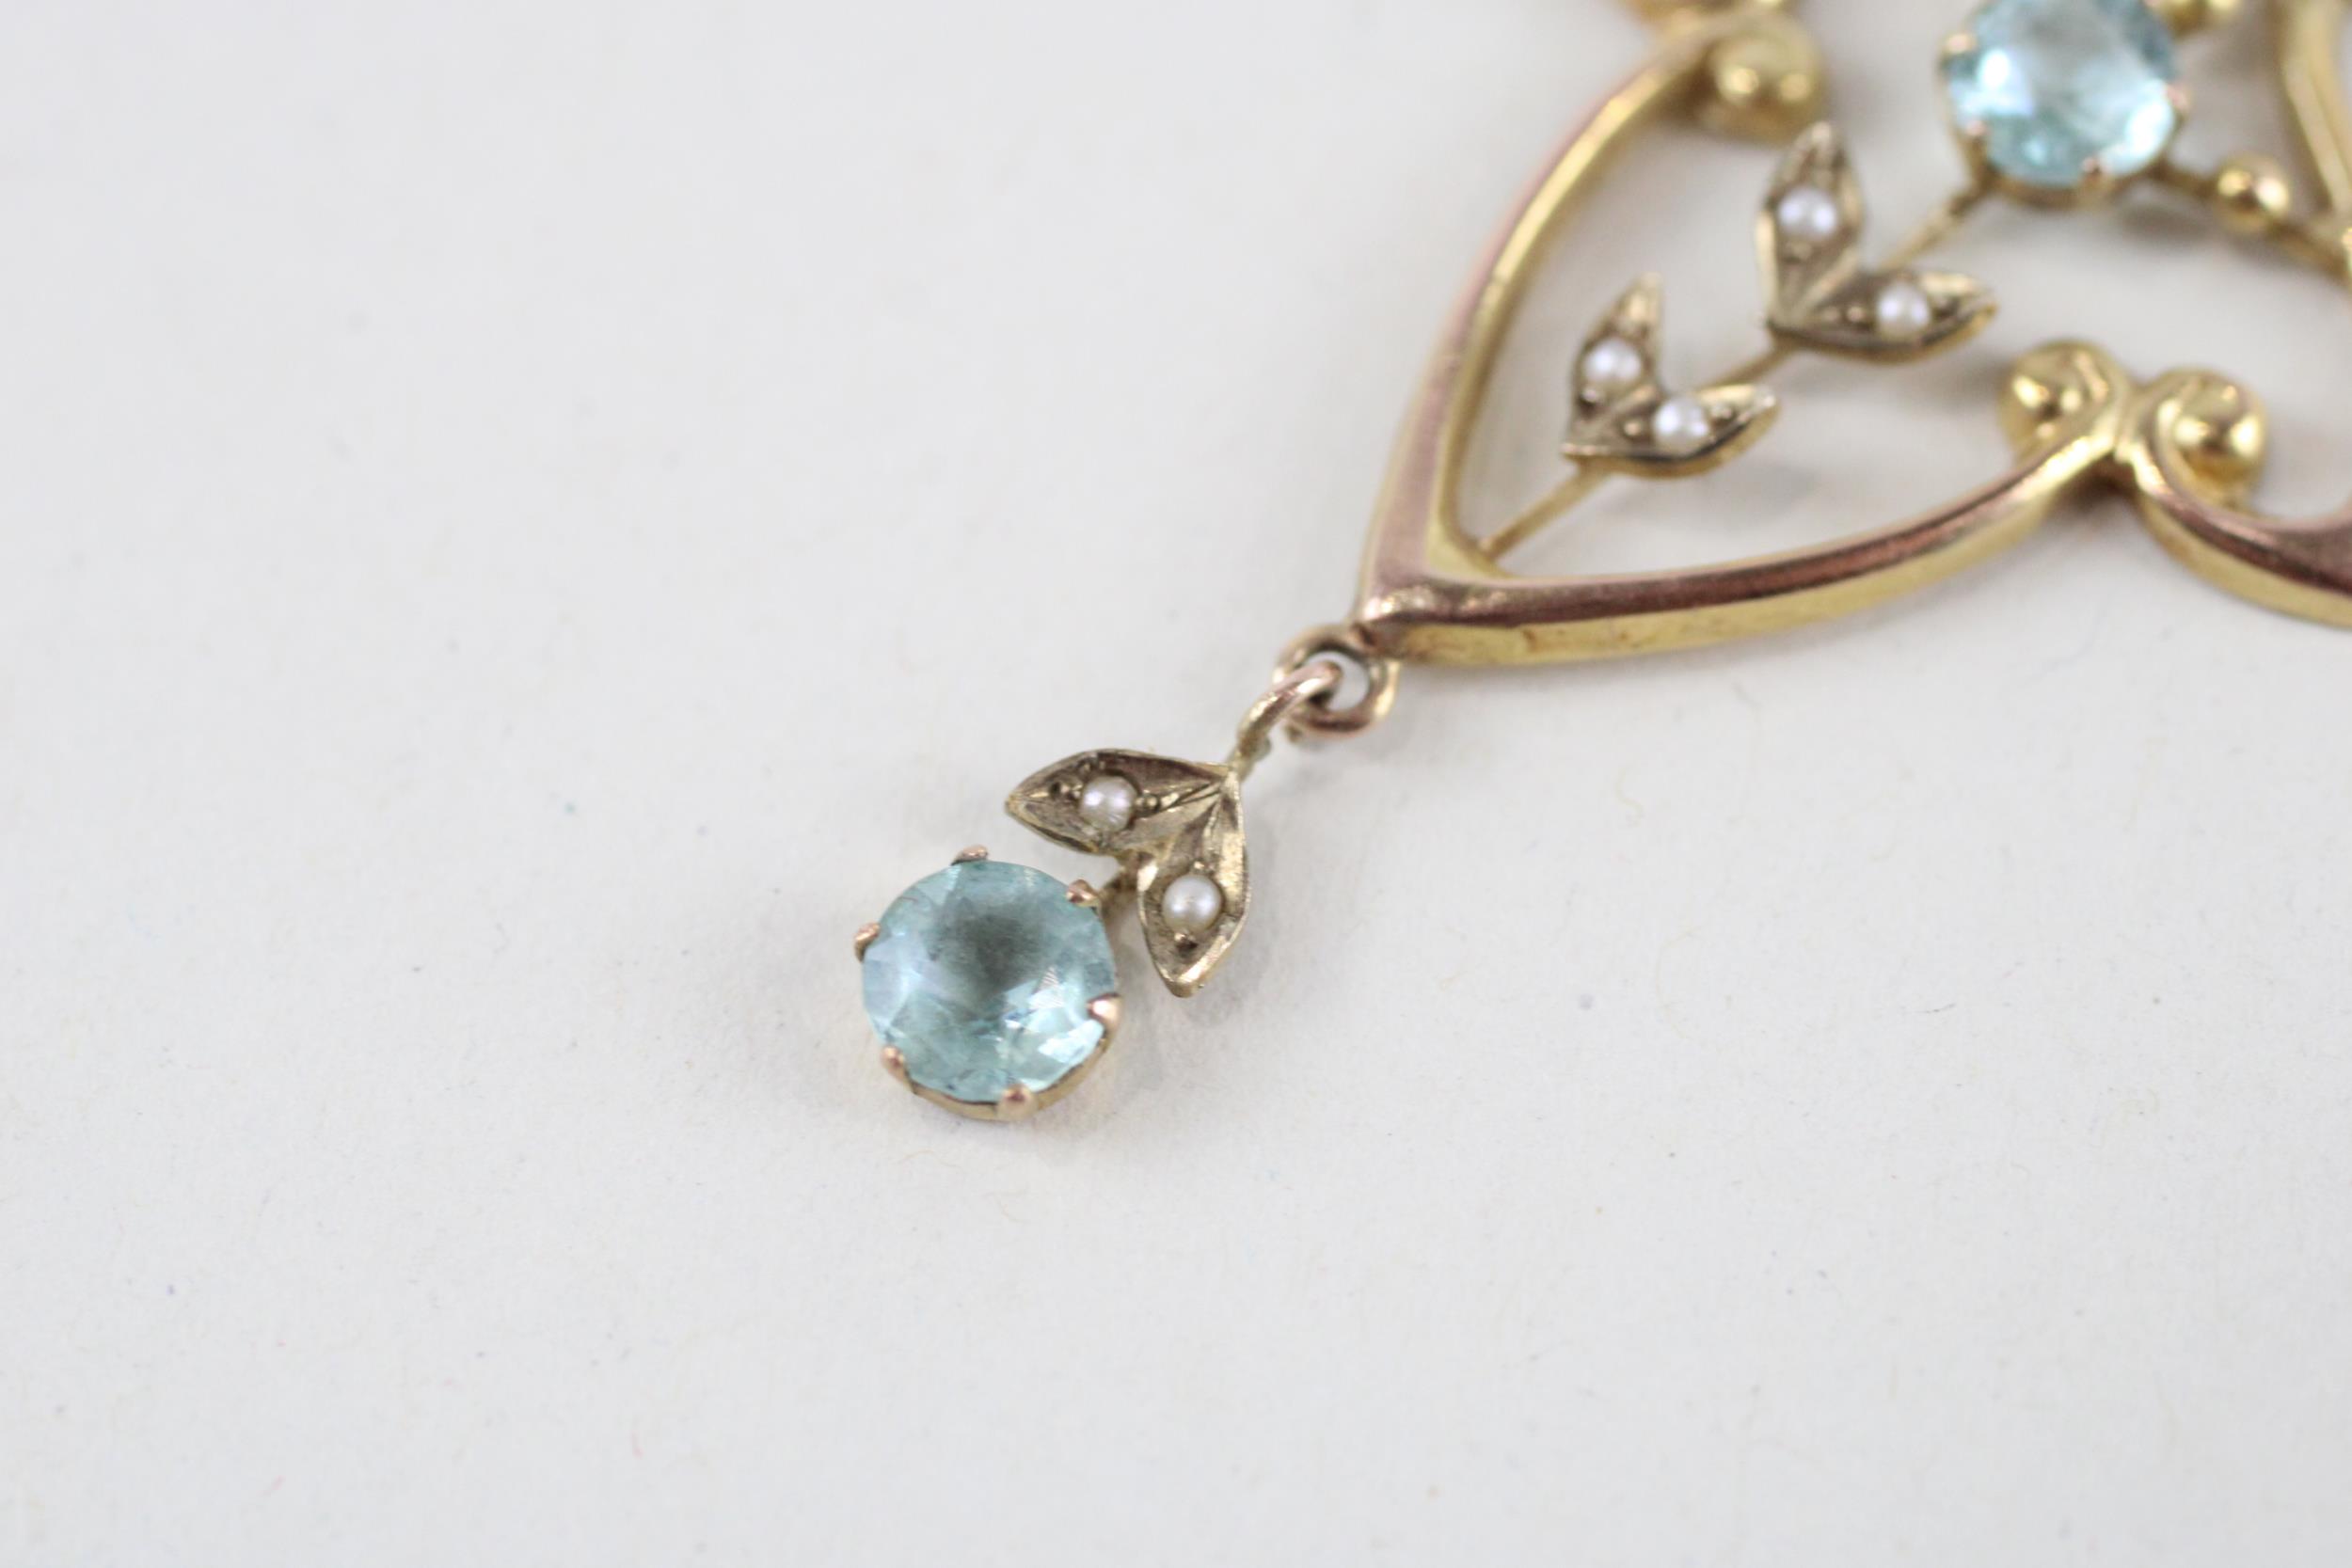 9ct gold blue gemstone & seed pearl pendant & chain (2.8g) - Image 2 of 4